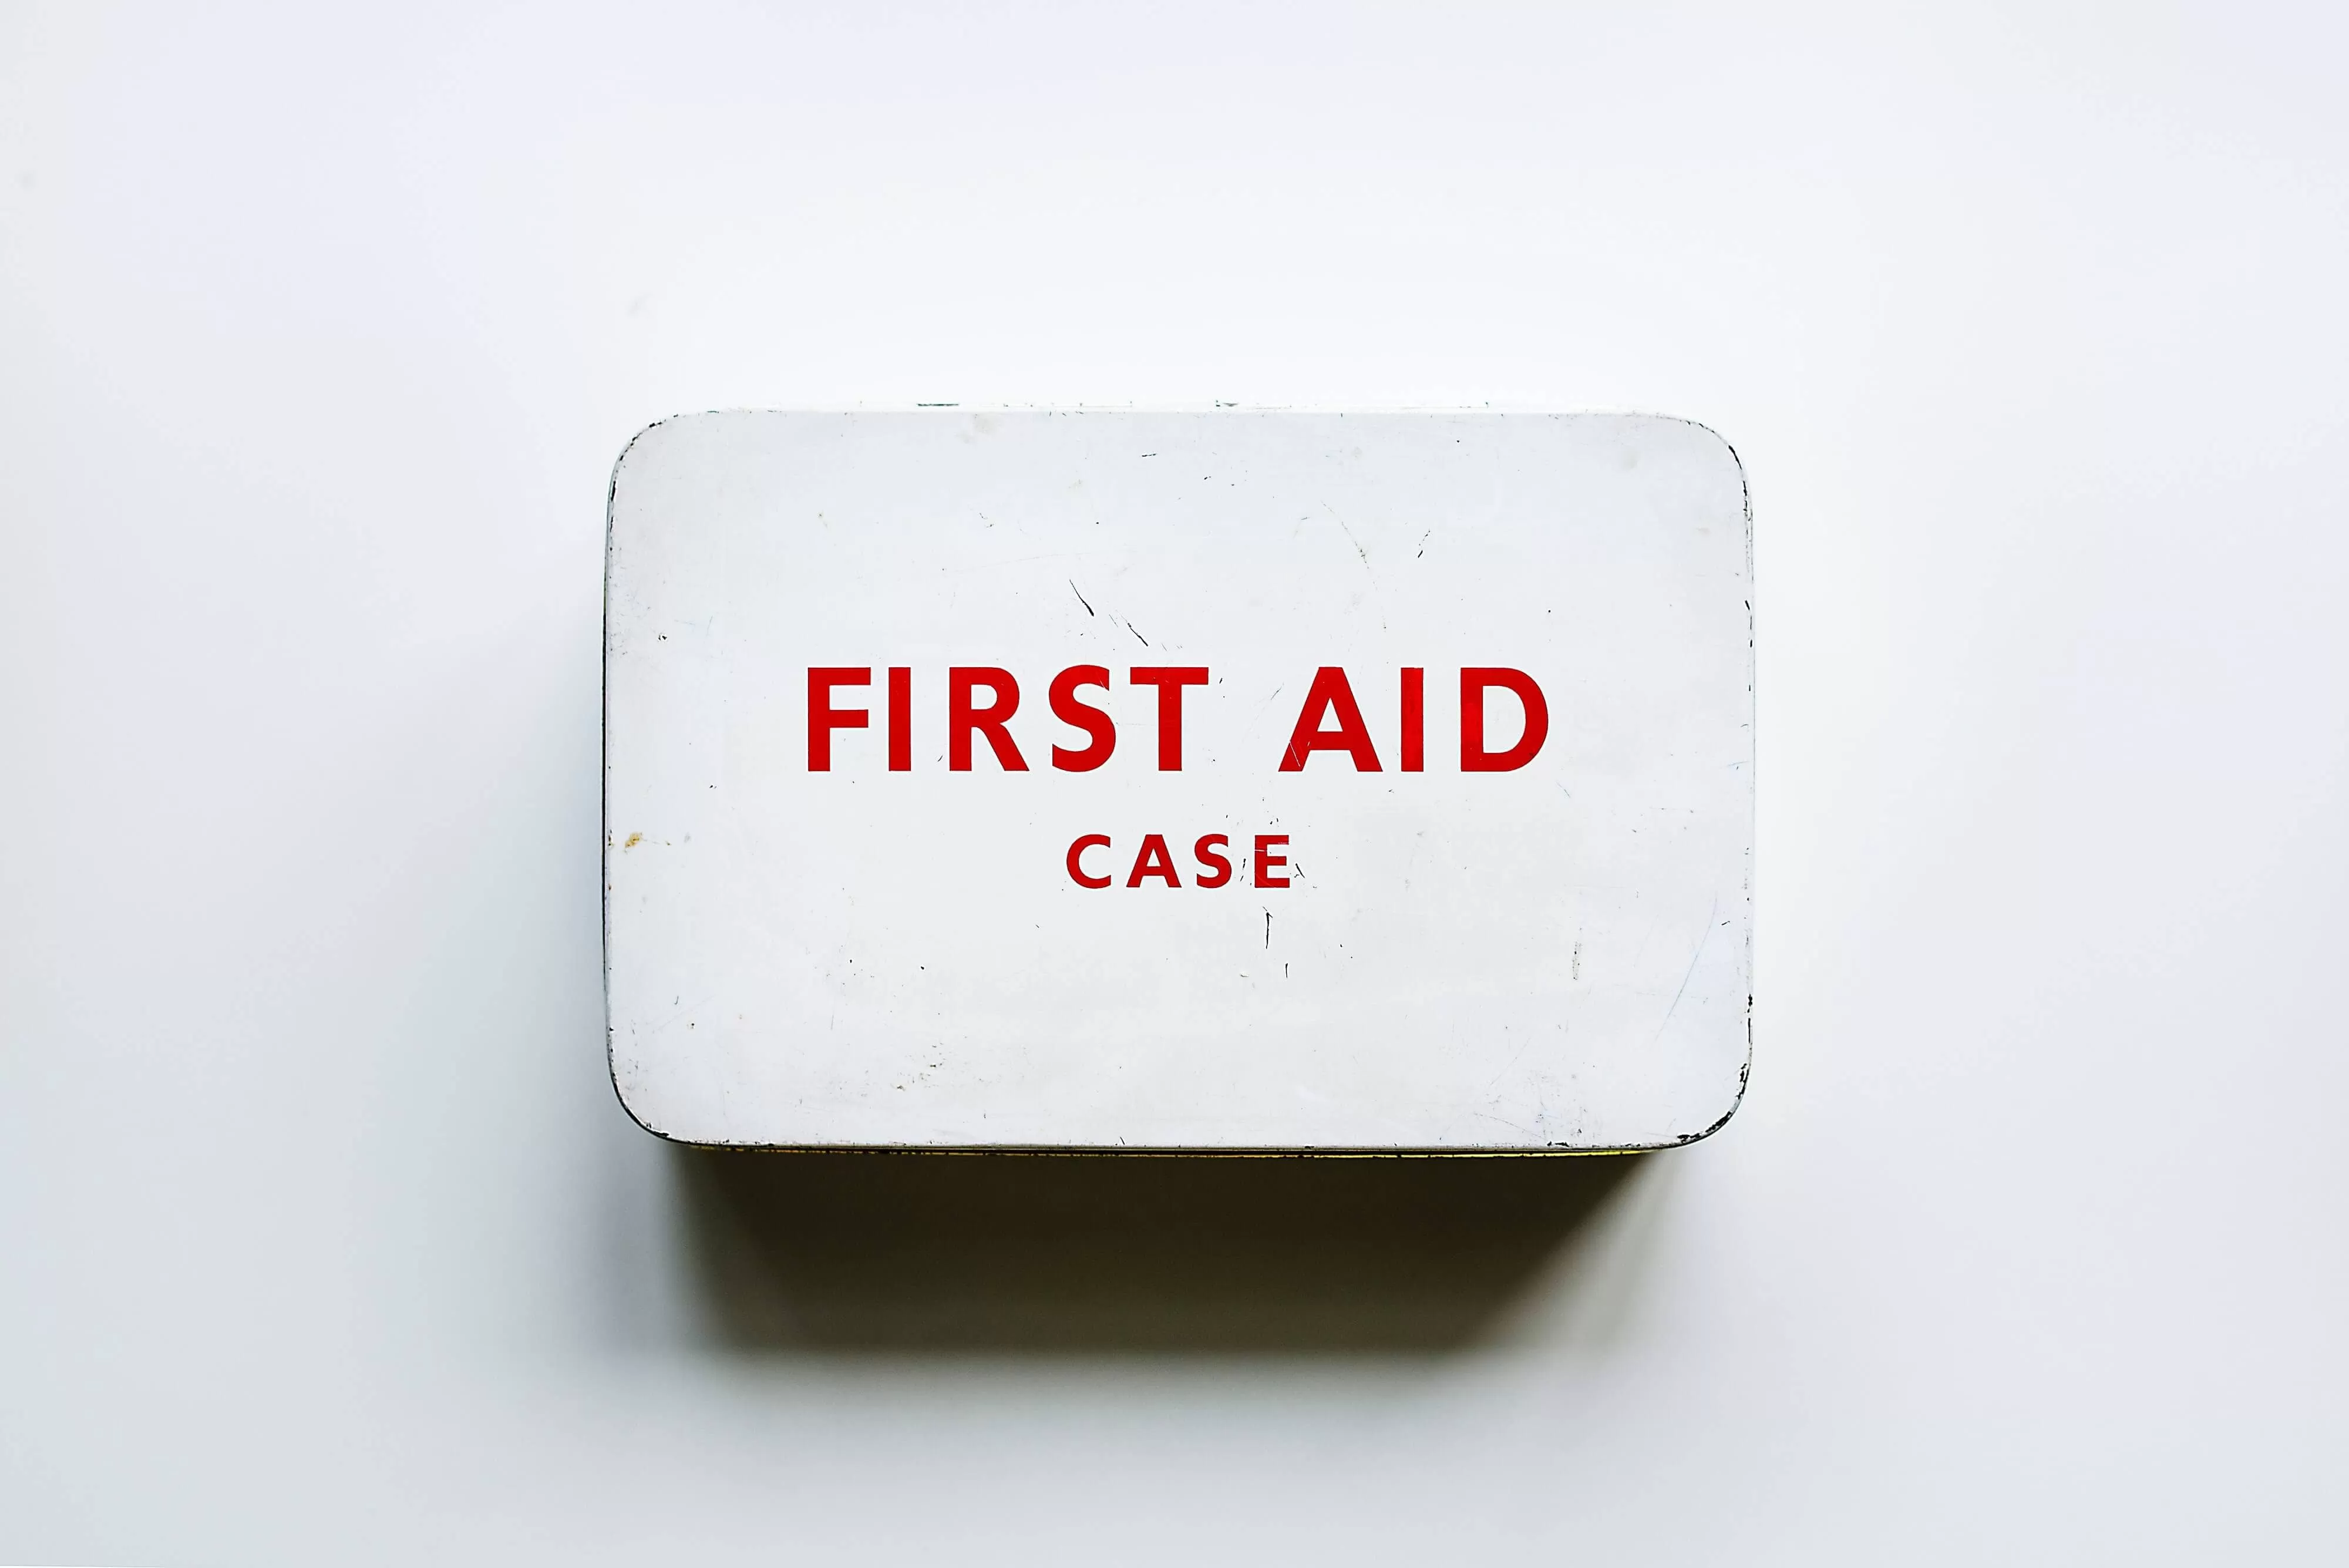 Sow first aid case